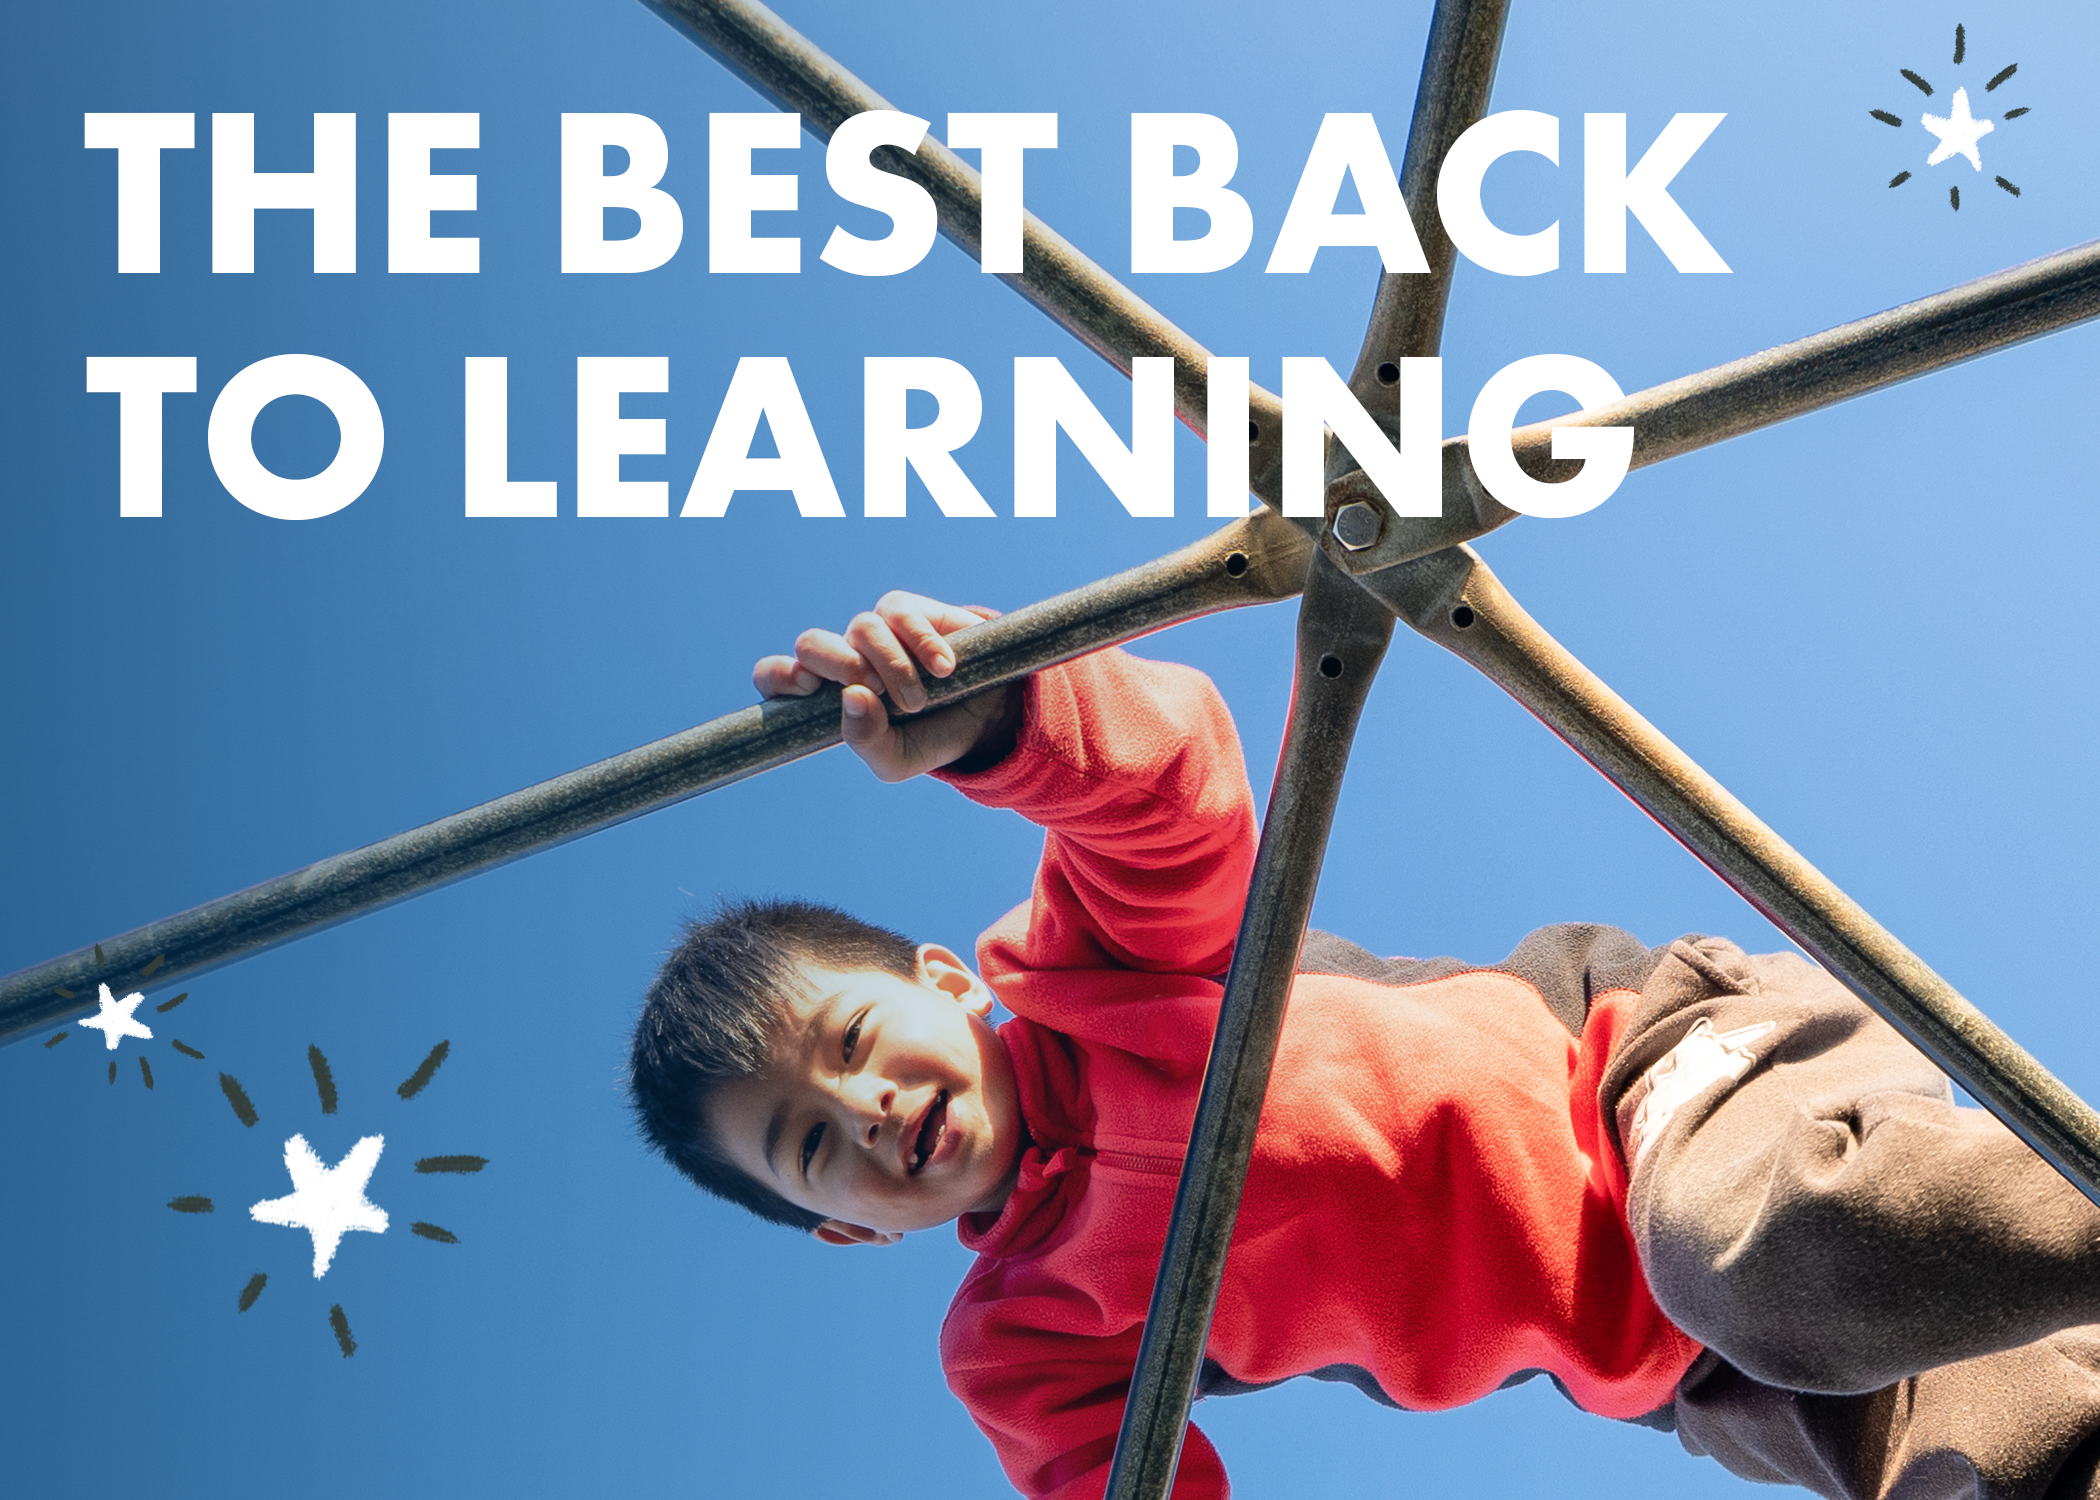 The Best Back to Learning